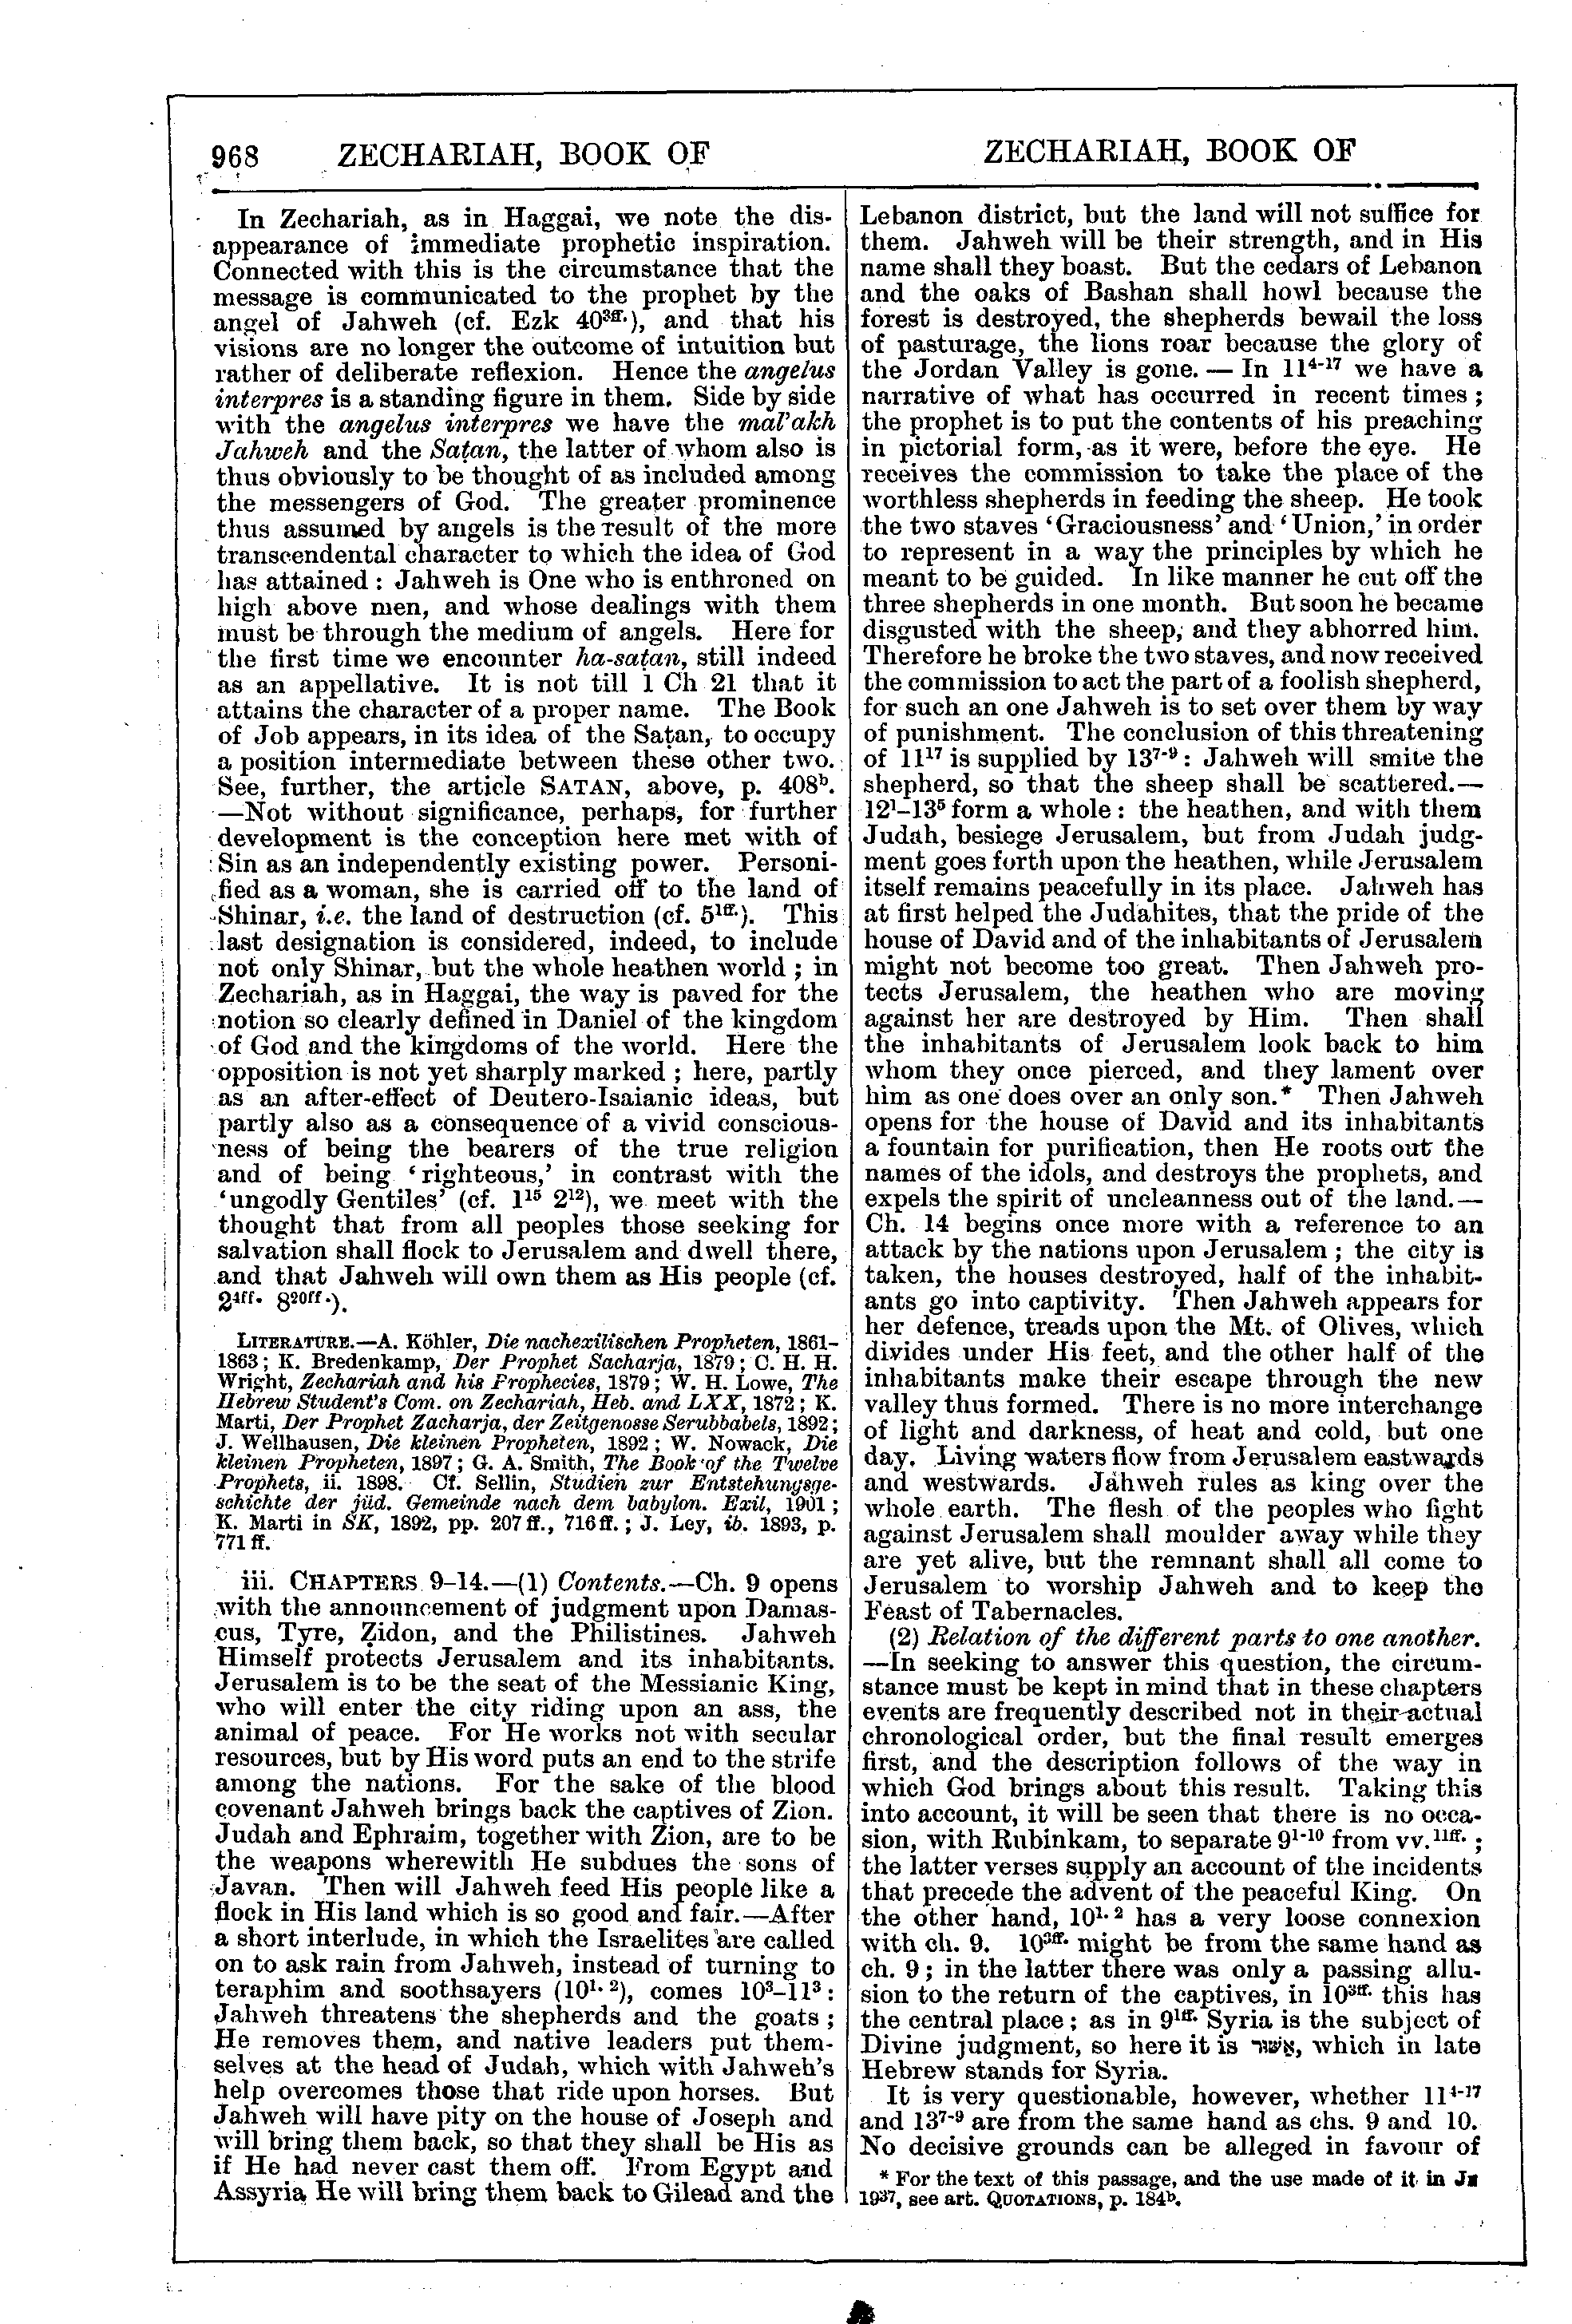 Image of page 968